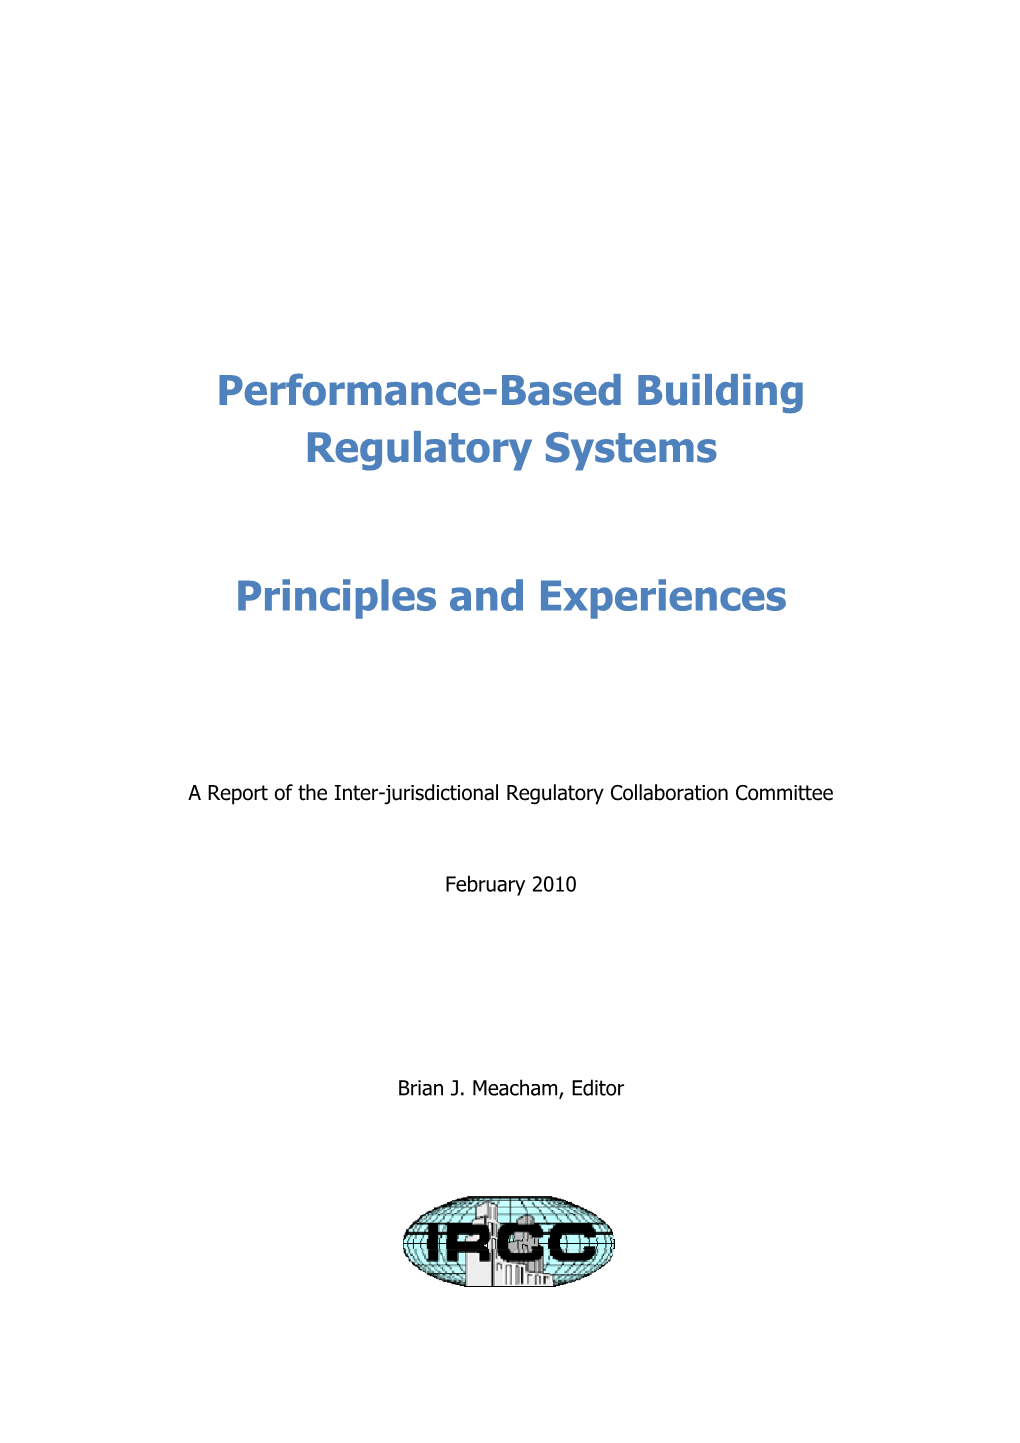 Performance-Based Building Regulatory Systems: Principles And